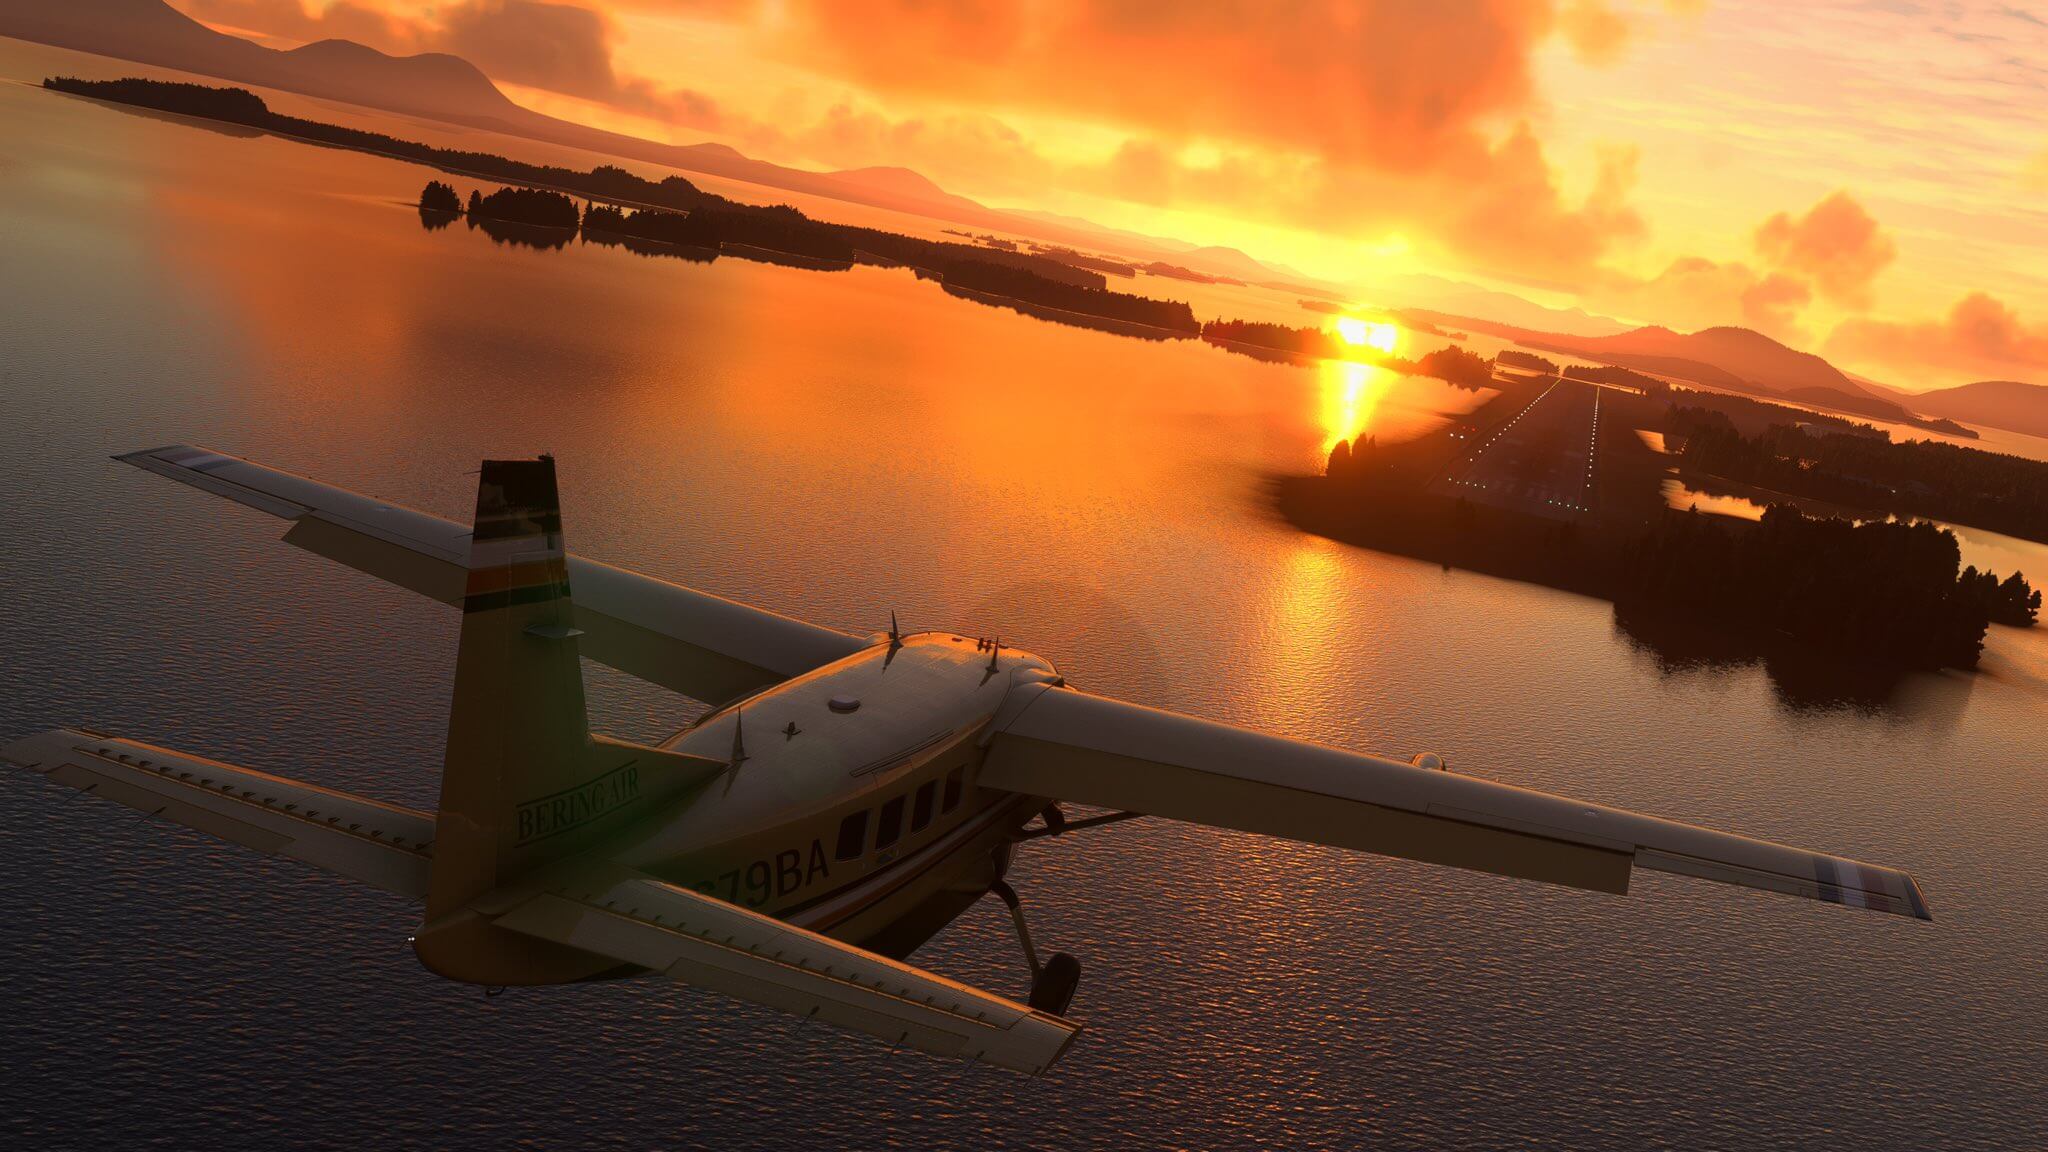 A Cessna Caravan on approach to land with the sun setting in the distance.